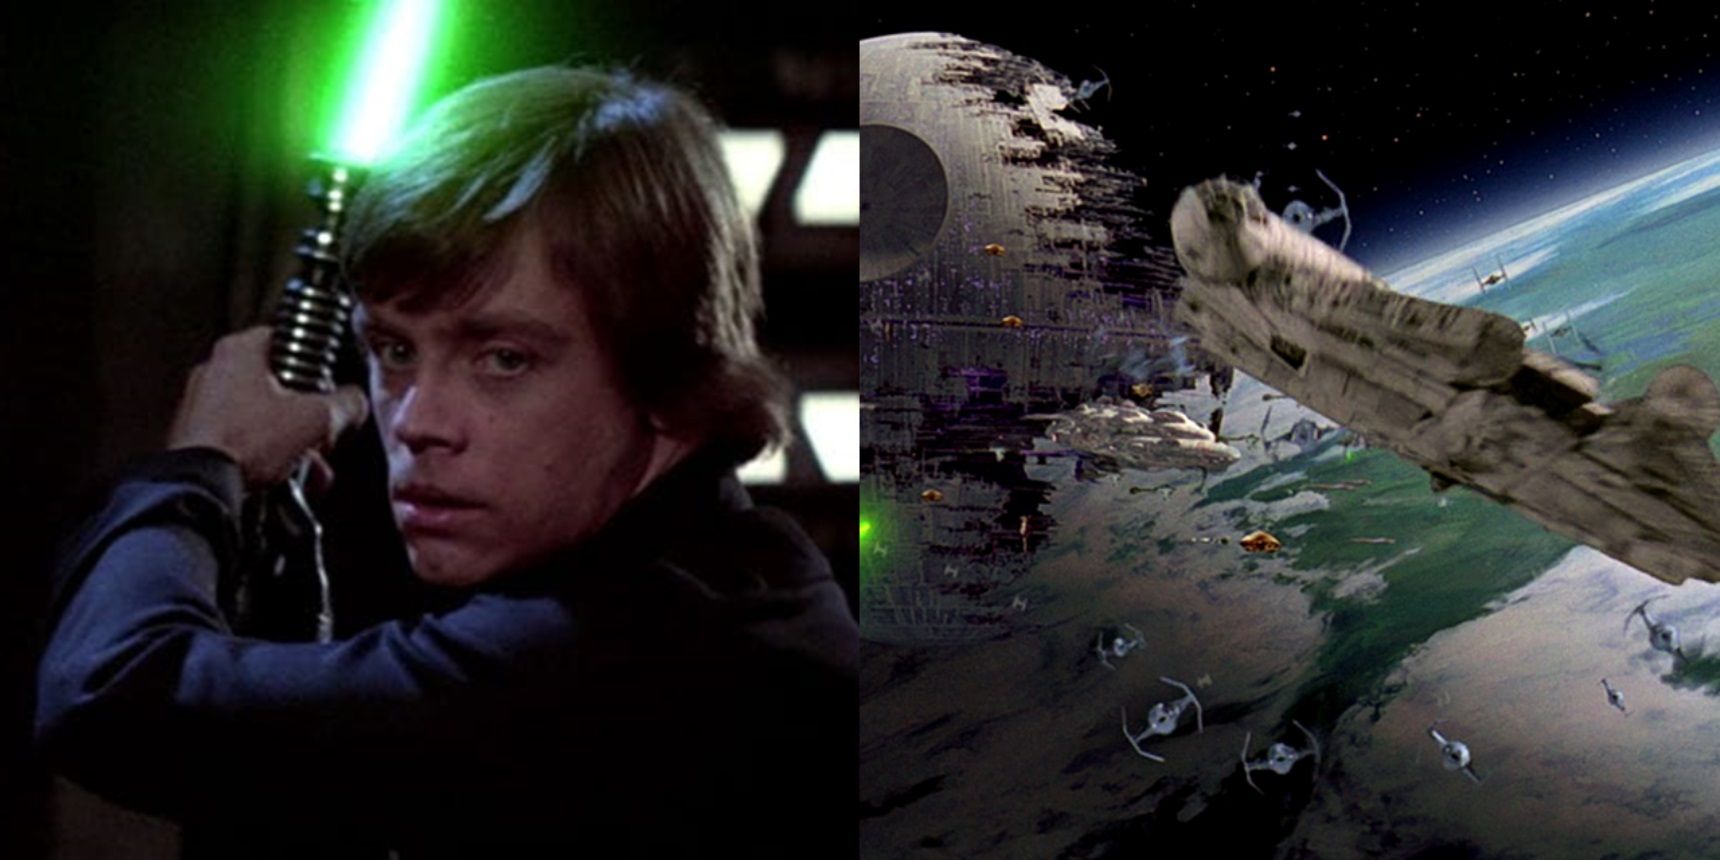 Return Of The Jedi Age Rating Hiked In The UK – For the Most Ridiculous Reason